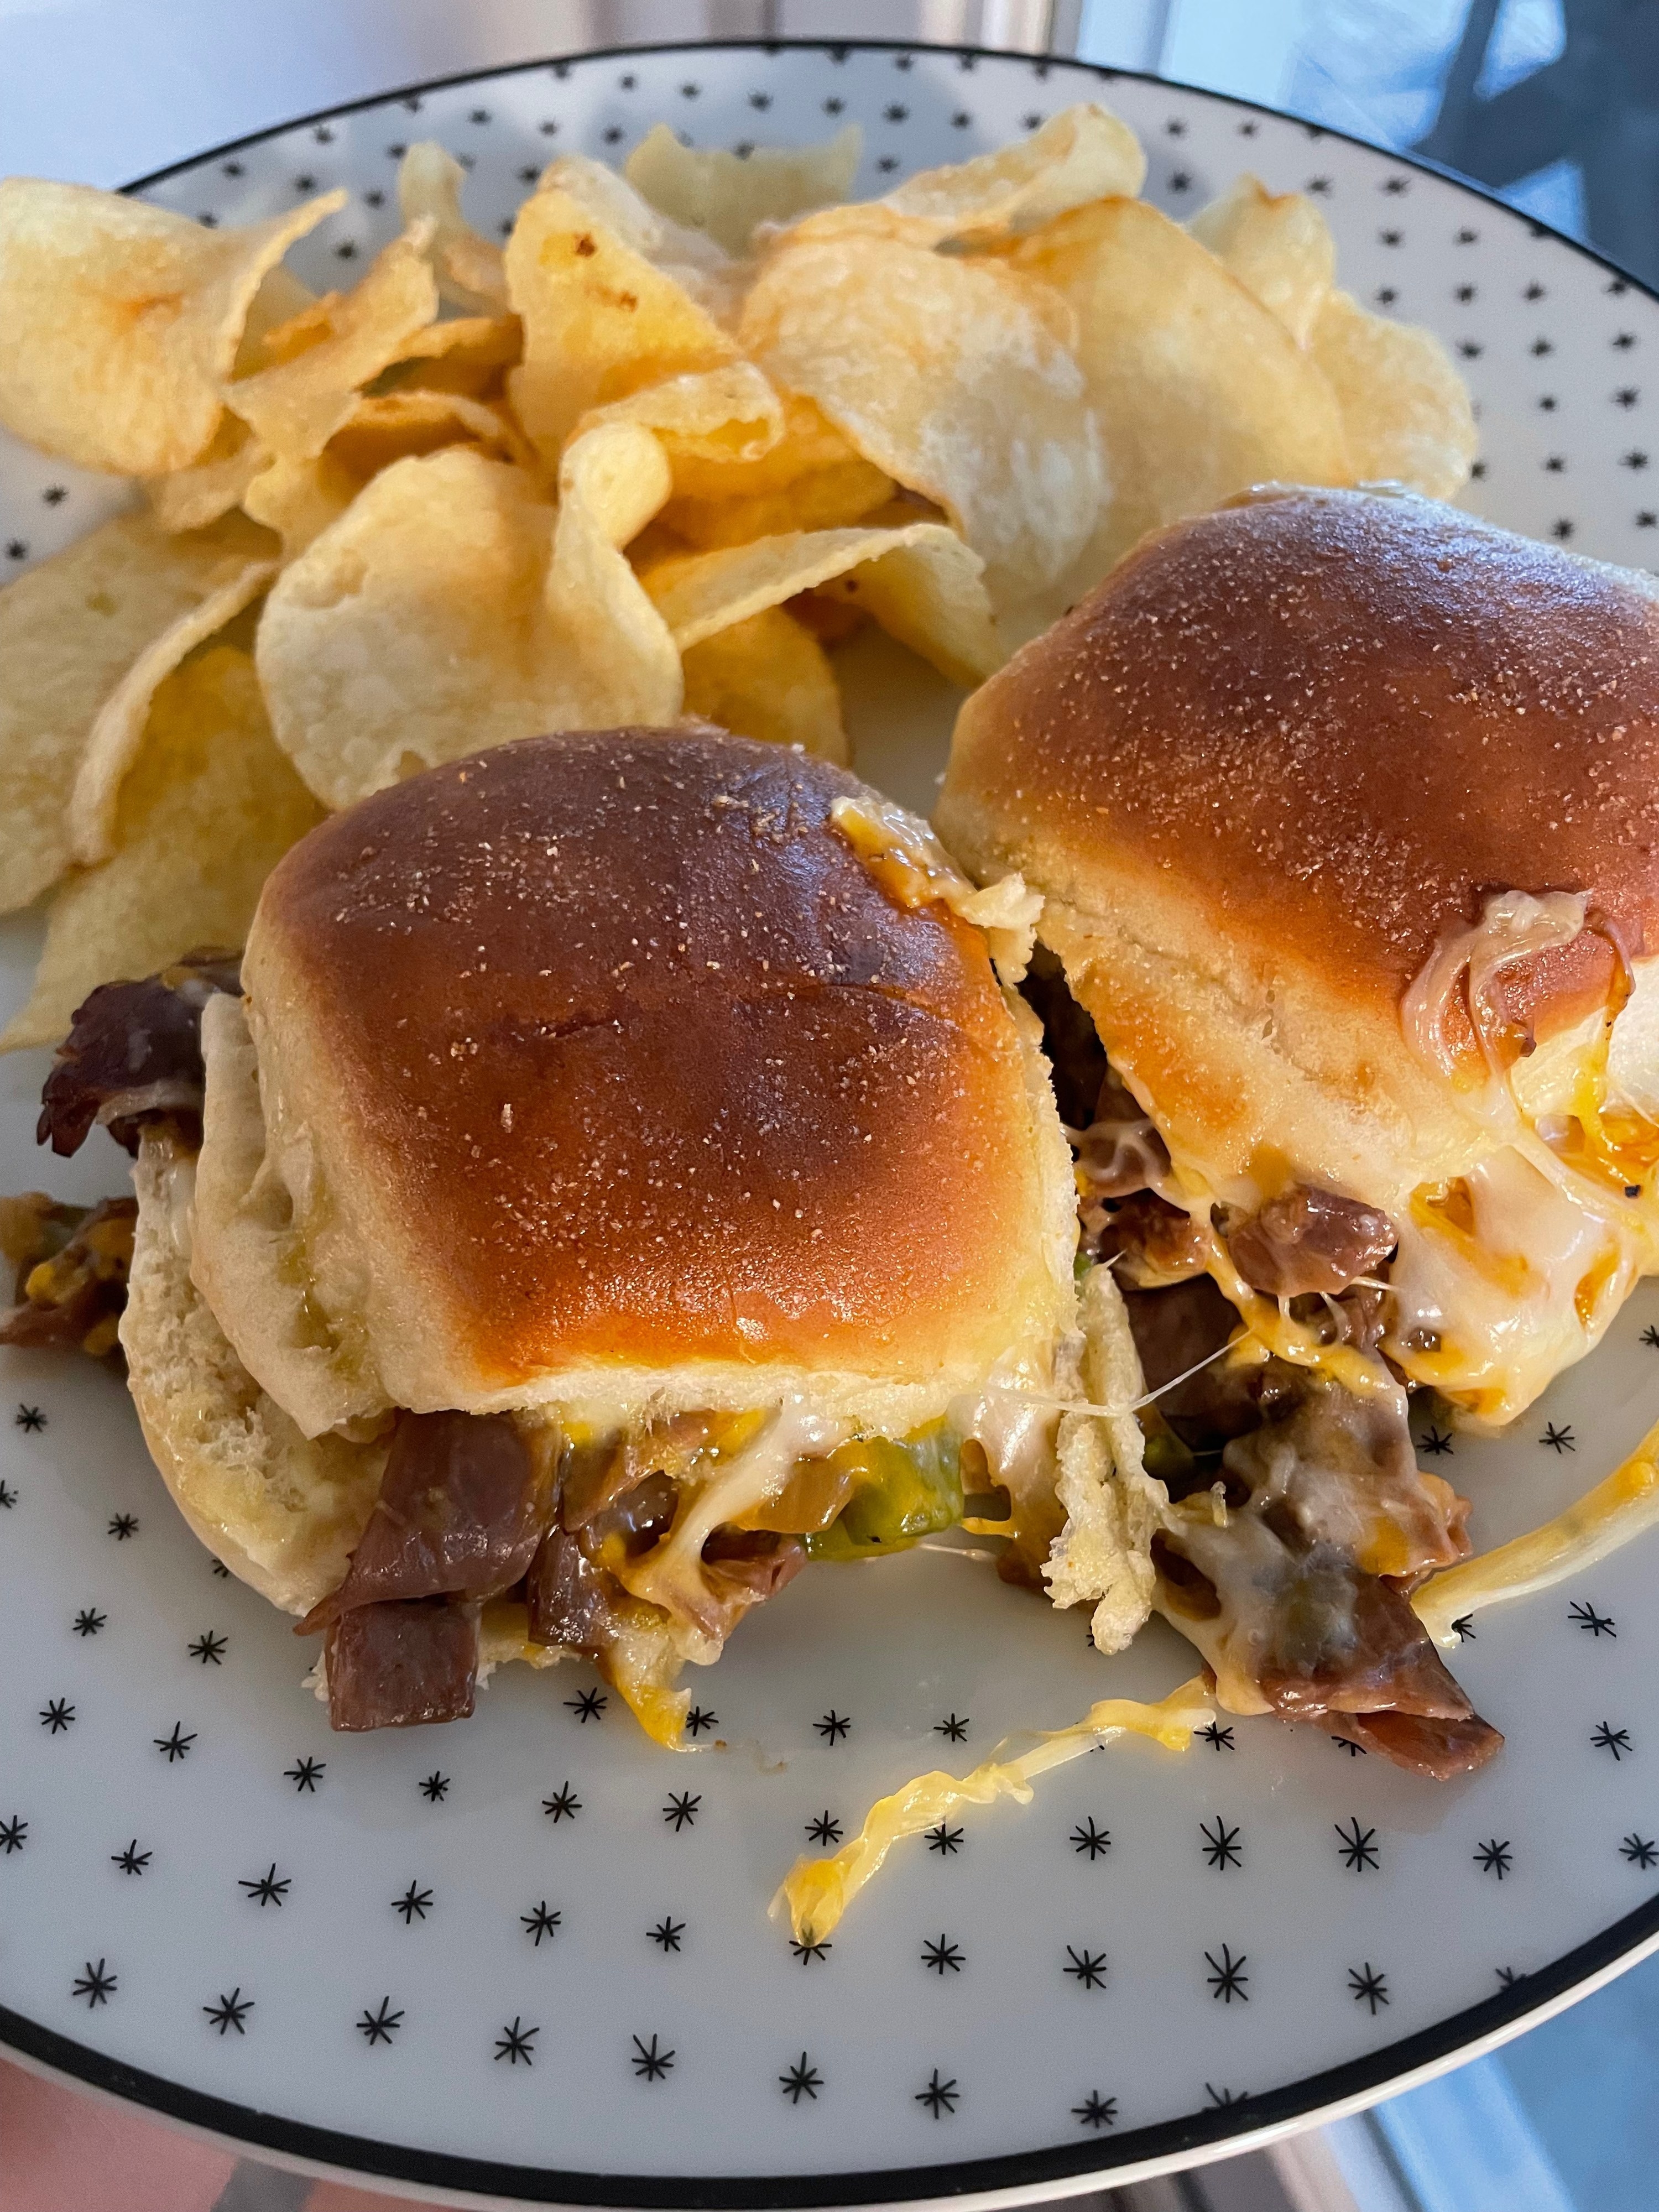 Philly cheesesteak sliders on a plate